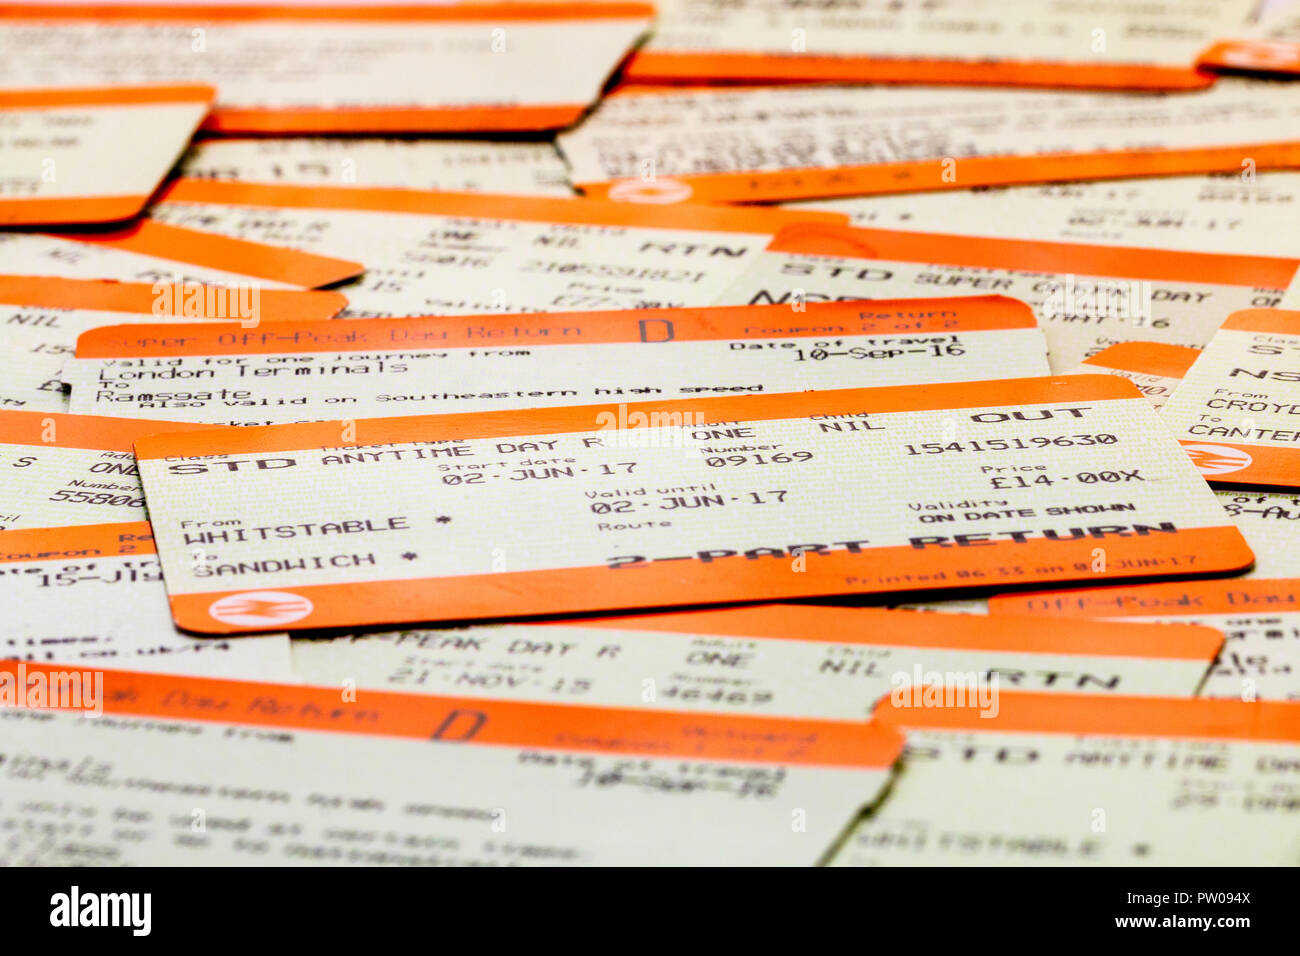 British railways ticket with others. Main ticket is standard anytime day return, Whitstable to Sandwich. Stock Photo